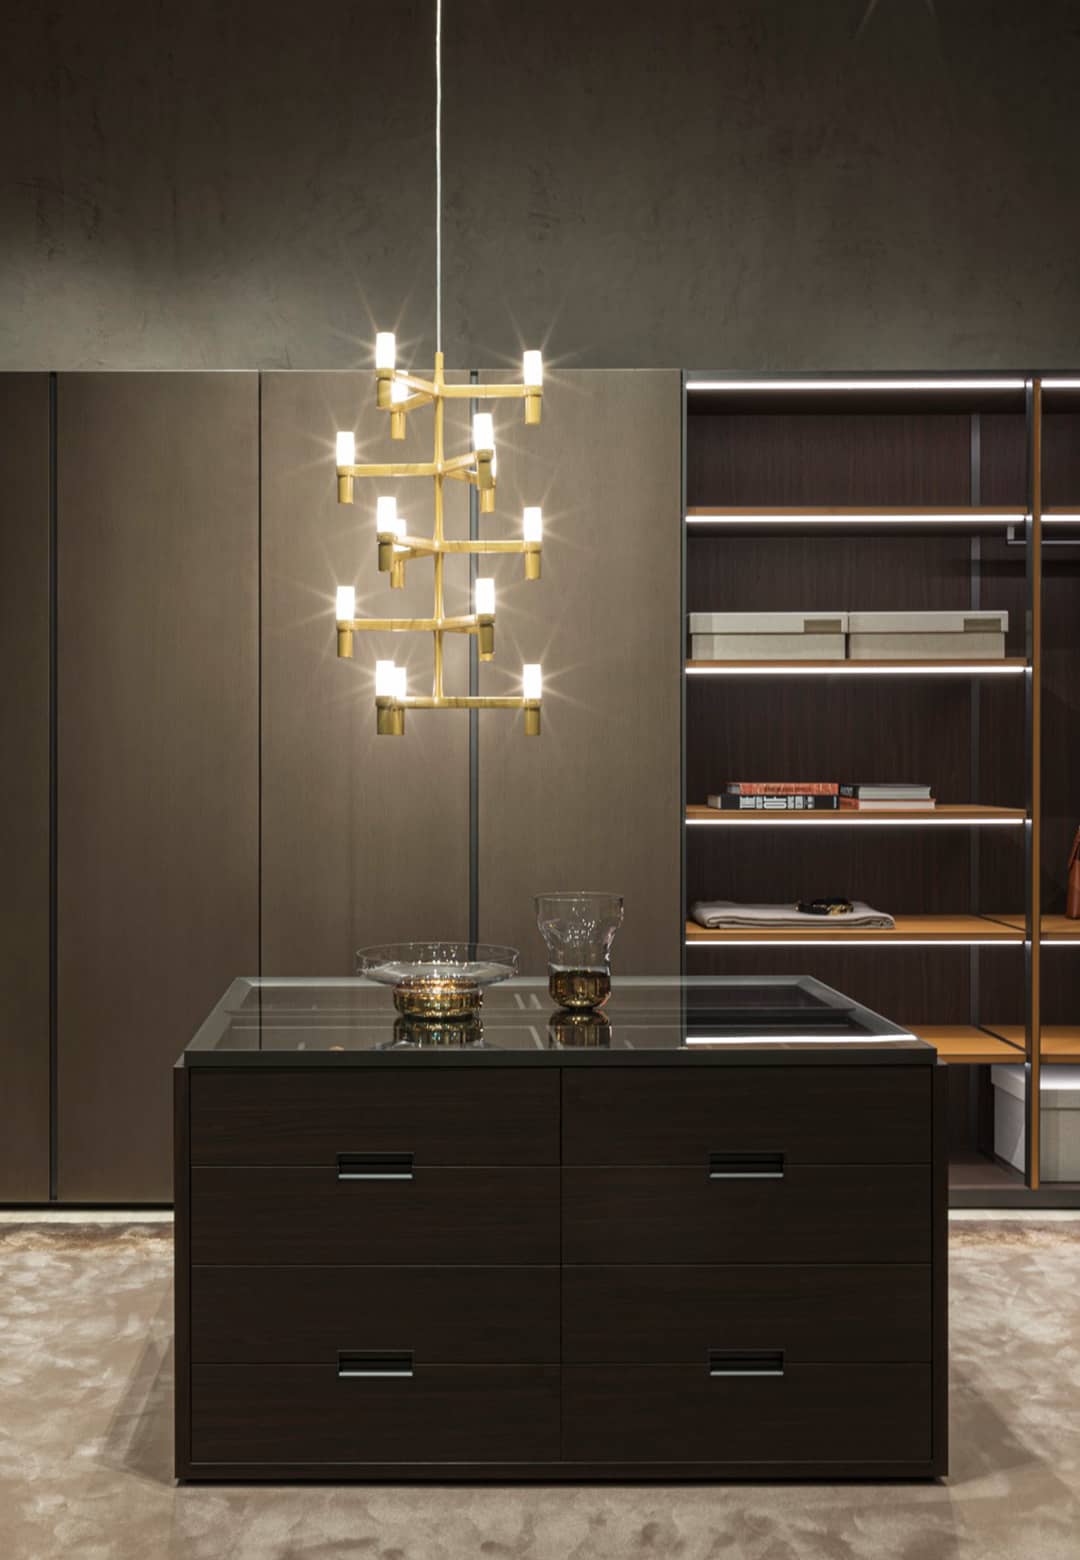 Molteni Group opens flagship store in Rome